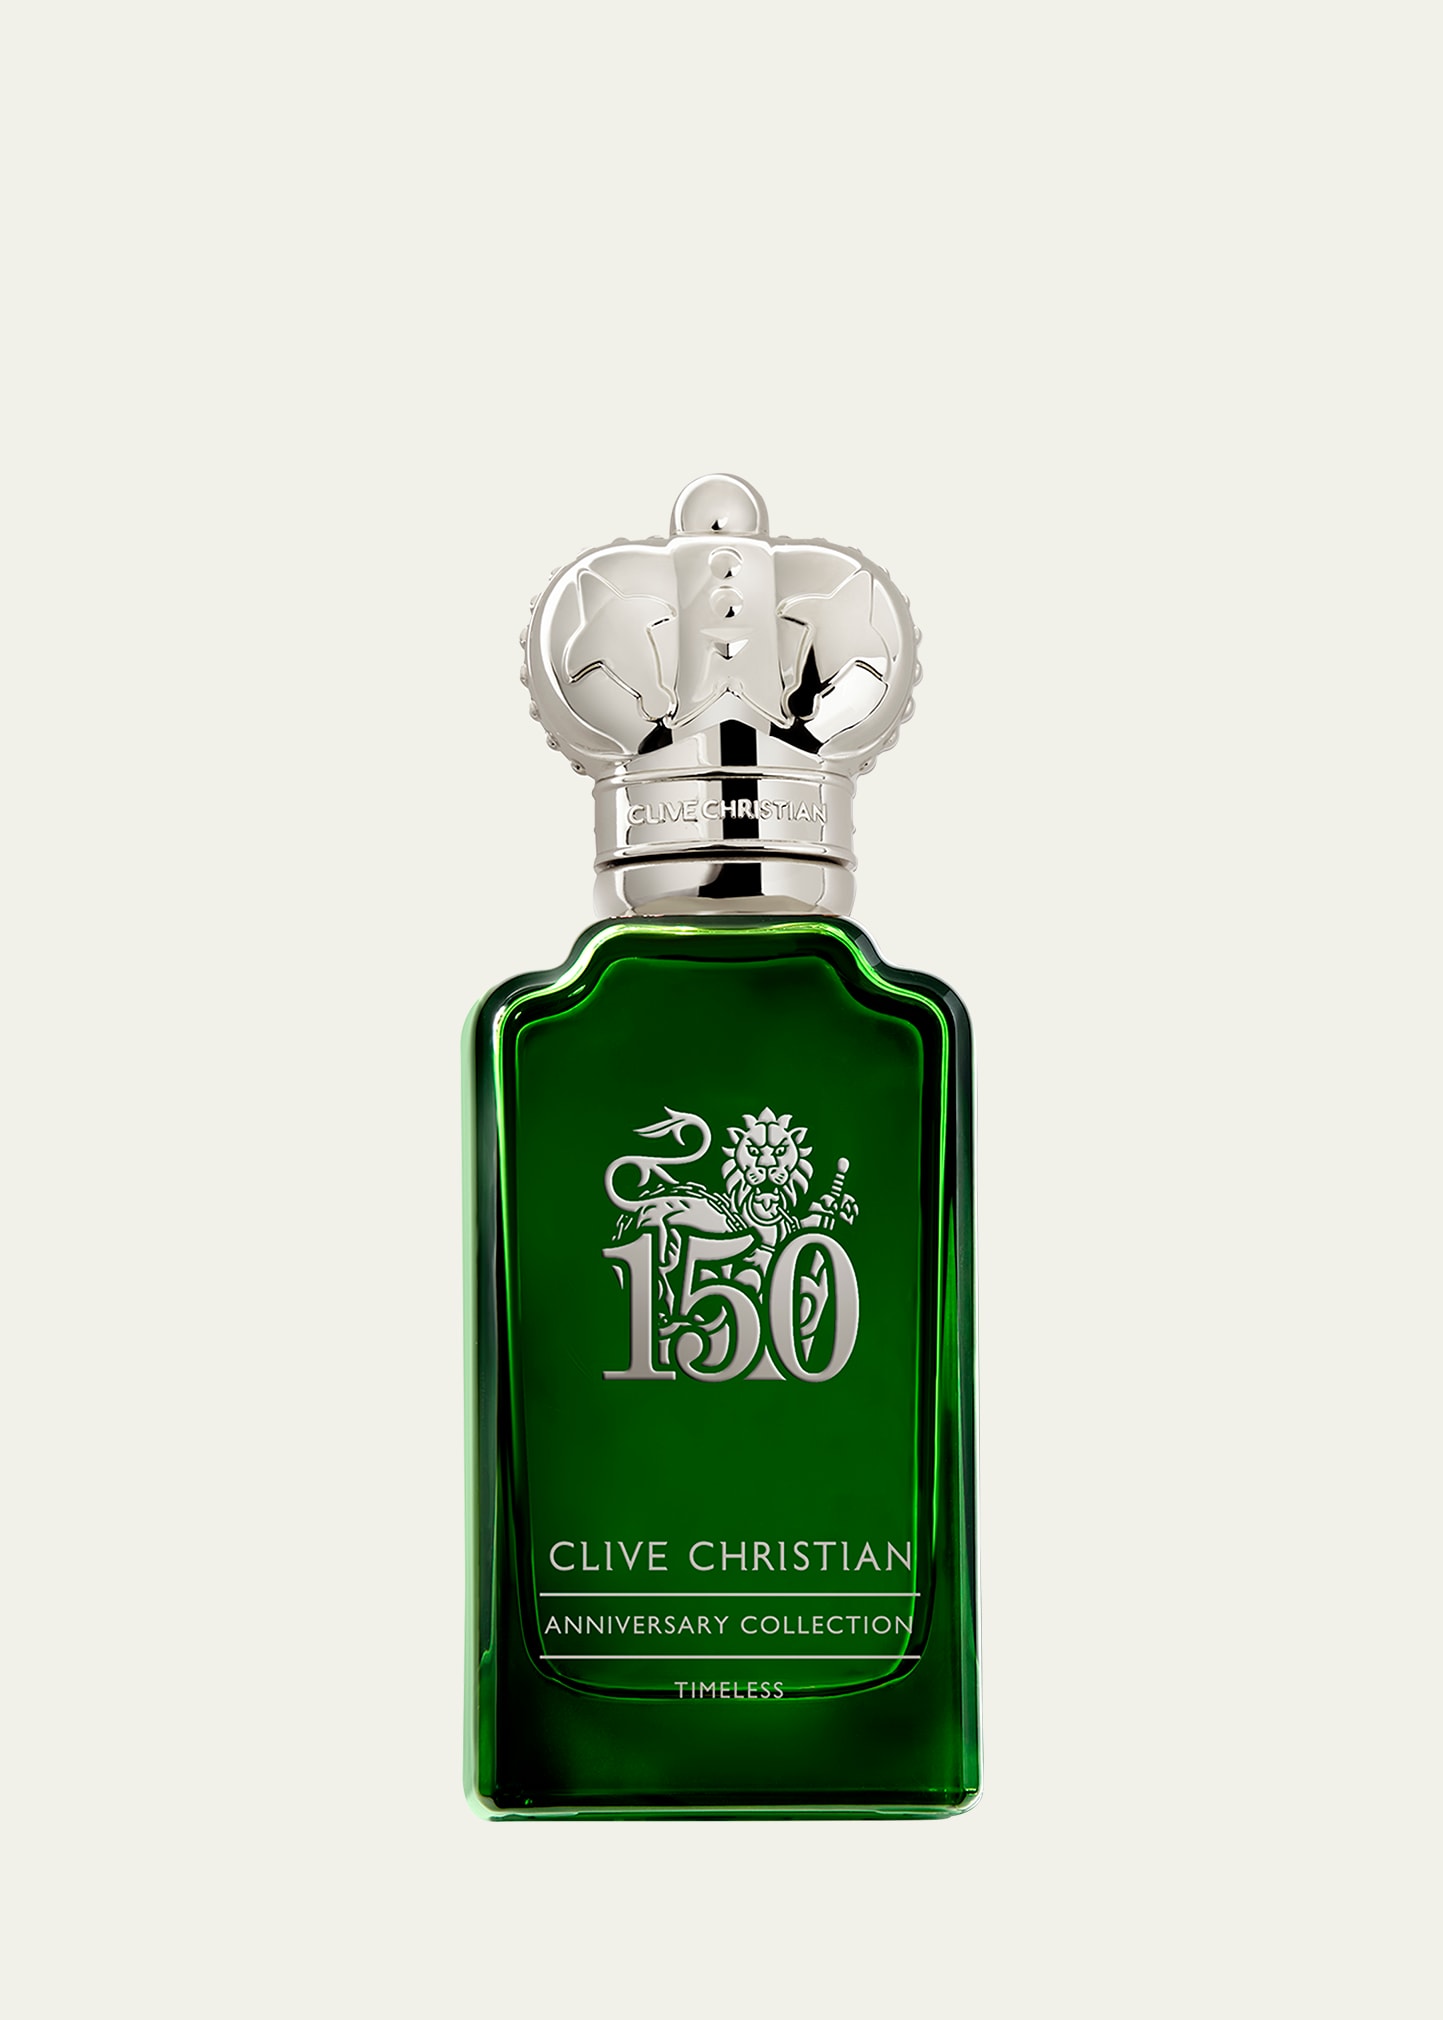 Clive Christian 150th Anniversary Timeless Cologne, 1.7 oz.